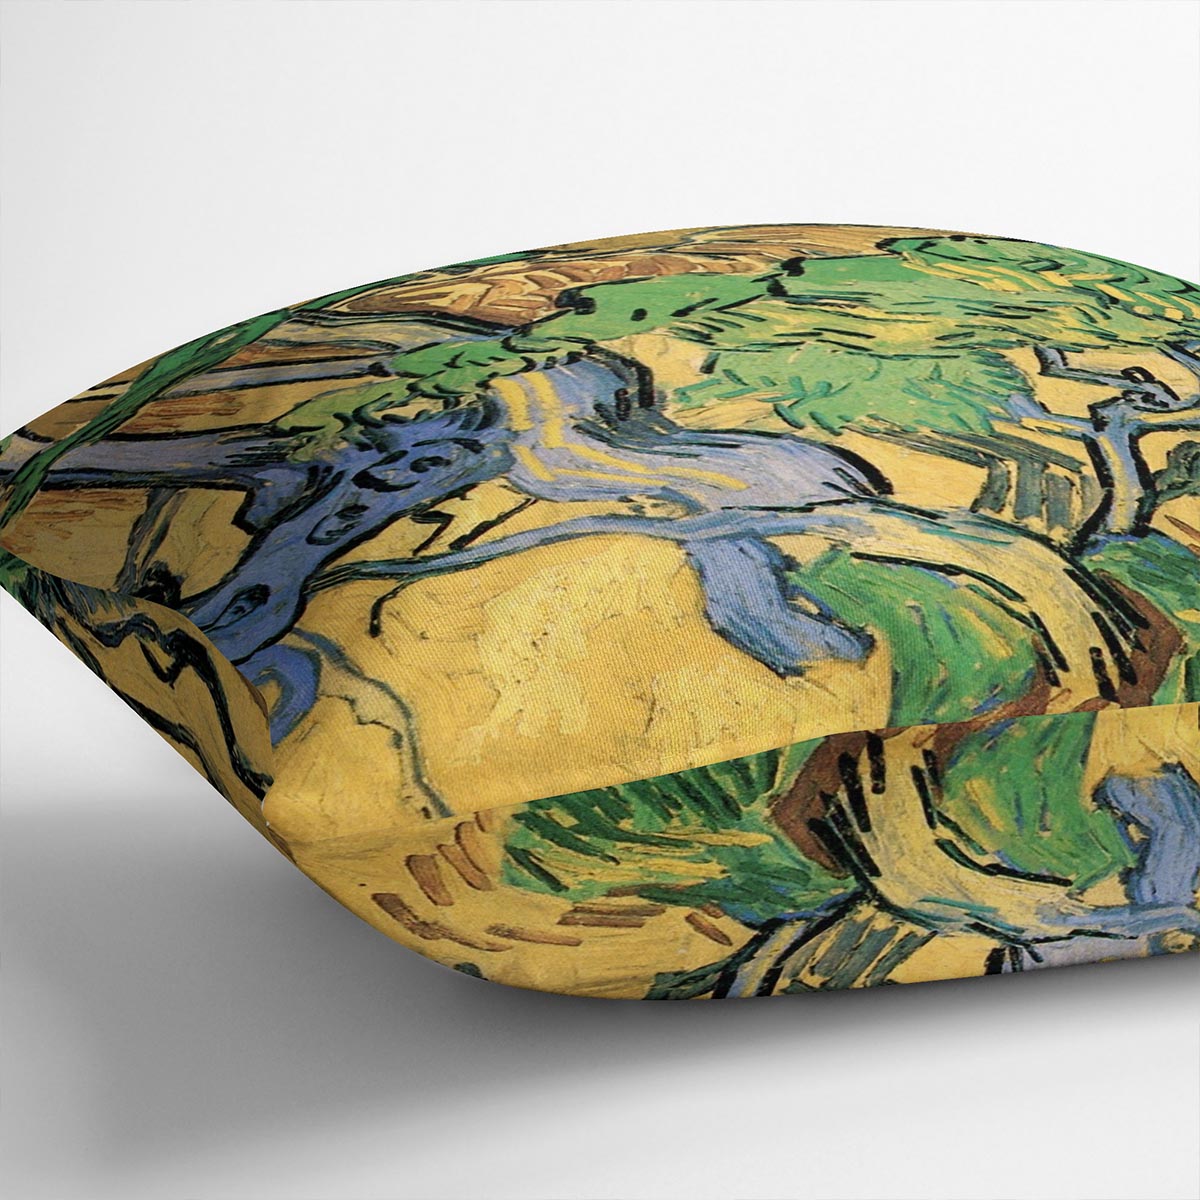 Tree Roots and Trunks by Van Gogh Cushion